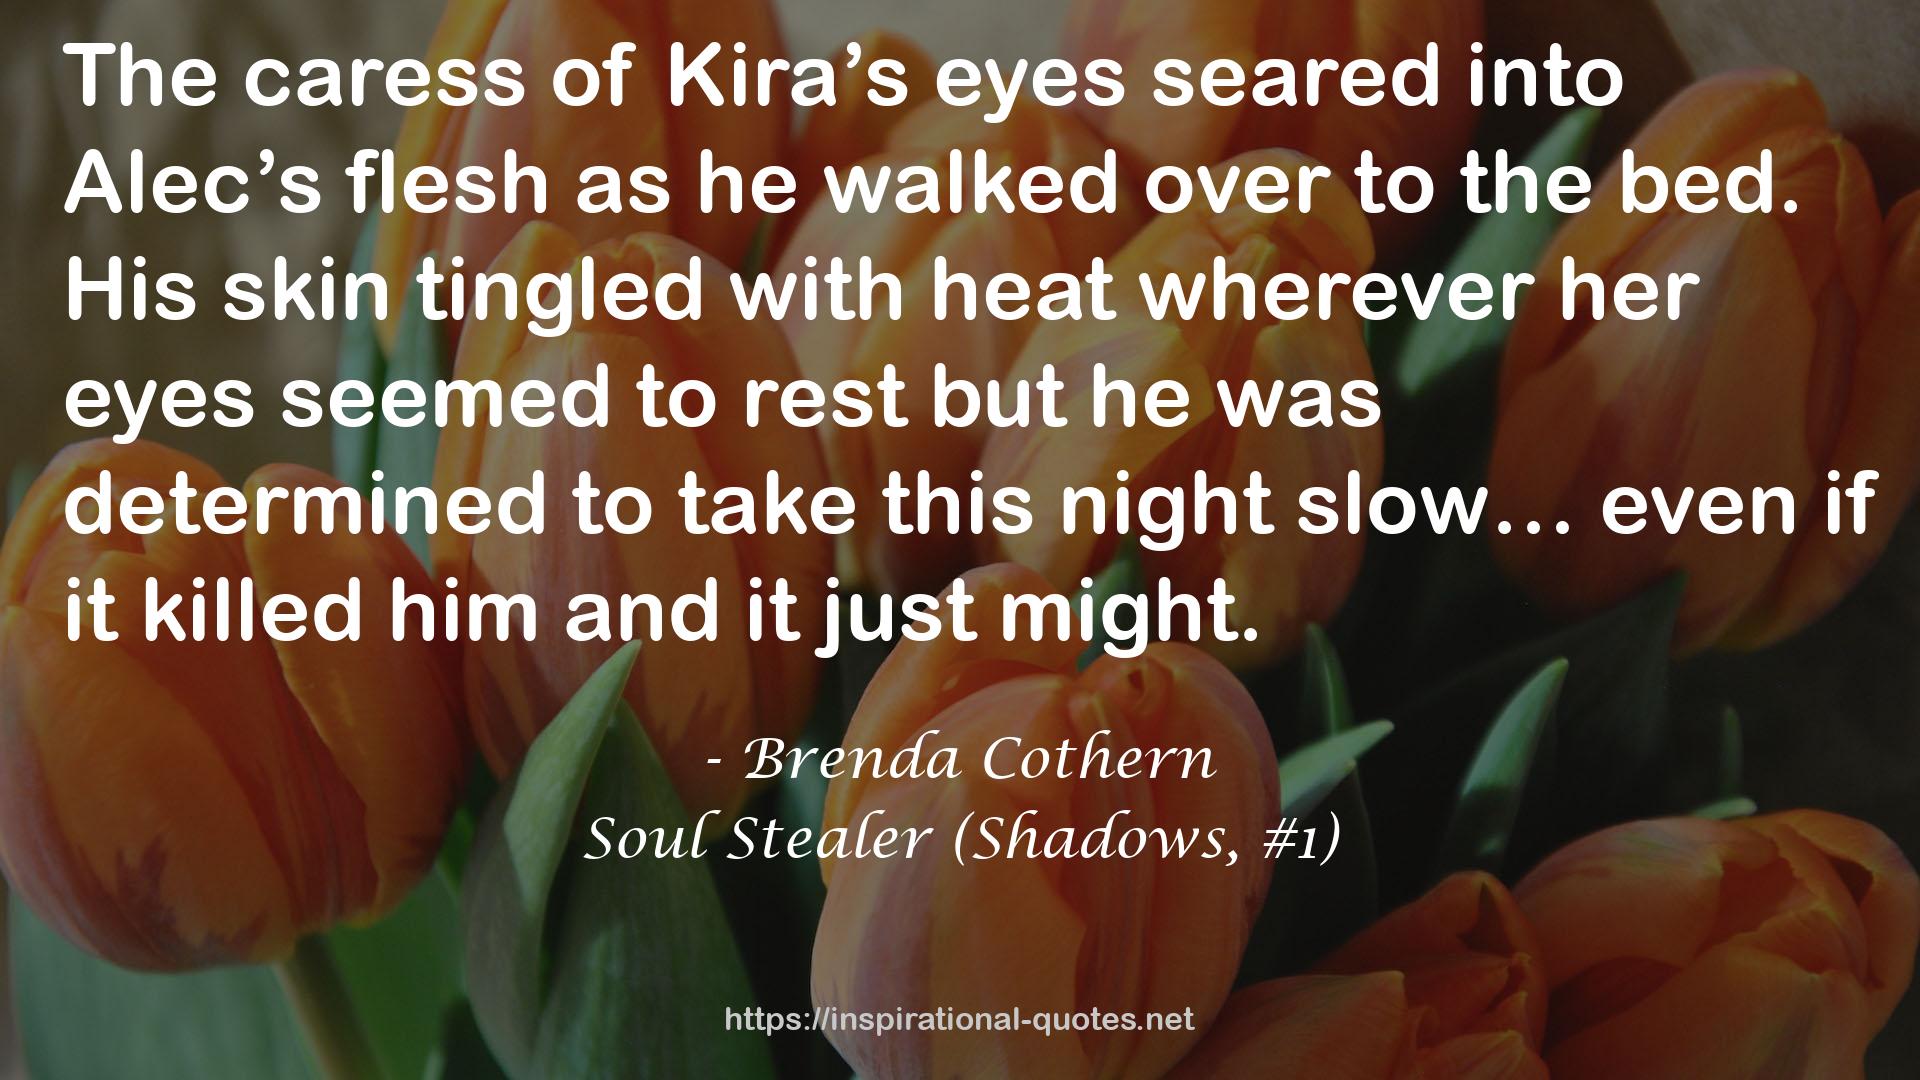 Soul Stealer (Shadows, #1) QUOTES